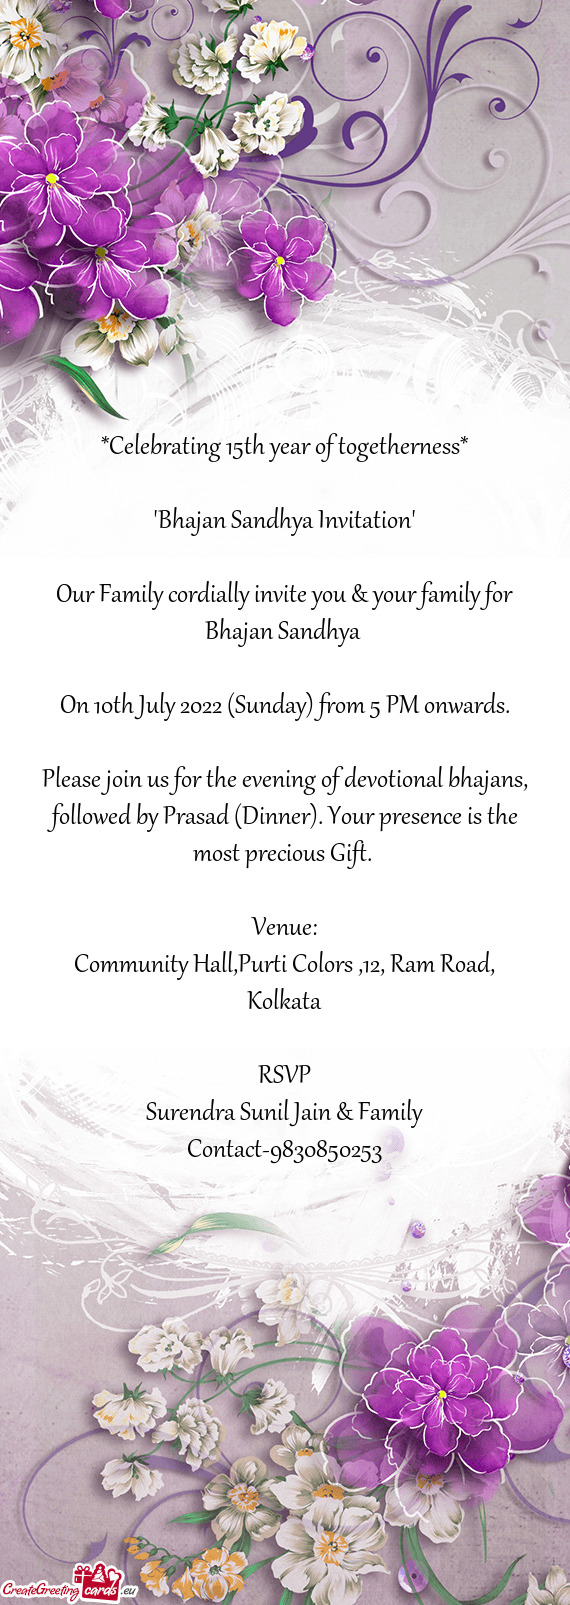 Our Family cordially invite you & your family for Bhajan Sandhya